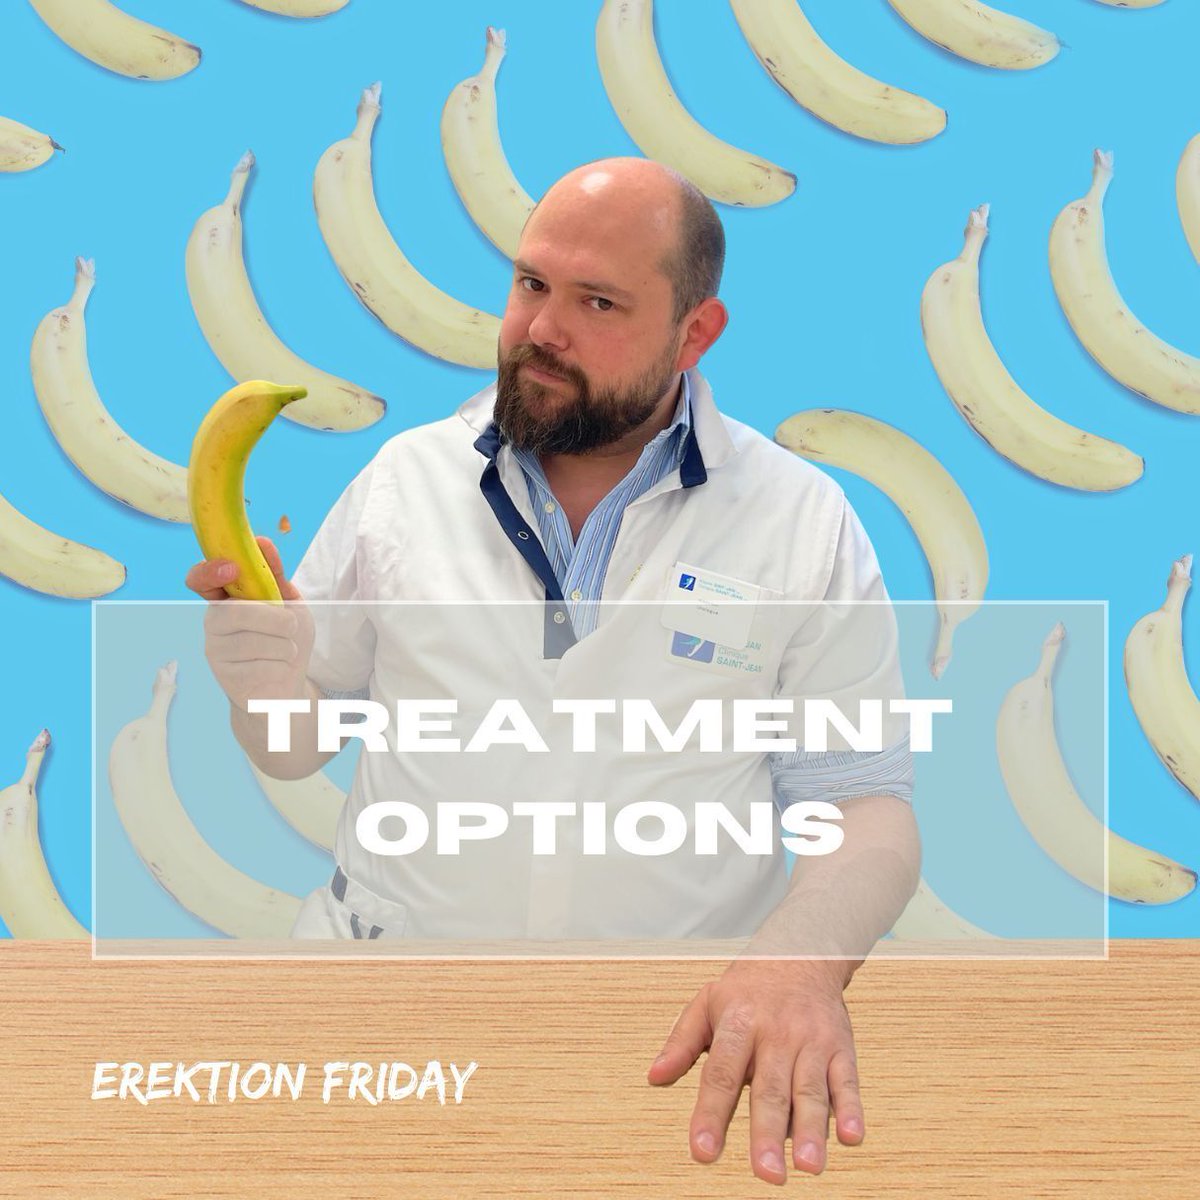 Struggling with er*ctile issues? You have options: medication, therapy, lifestyle changes. Consult your urologist.. buff.ly/3SUaRgG #sexualwellbeing #menshealthexpert #sexualhealthexpert #urology #andrologist #WardOfYourHealth